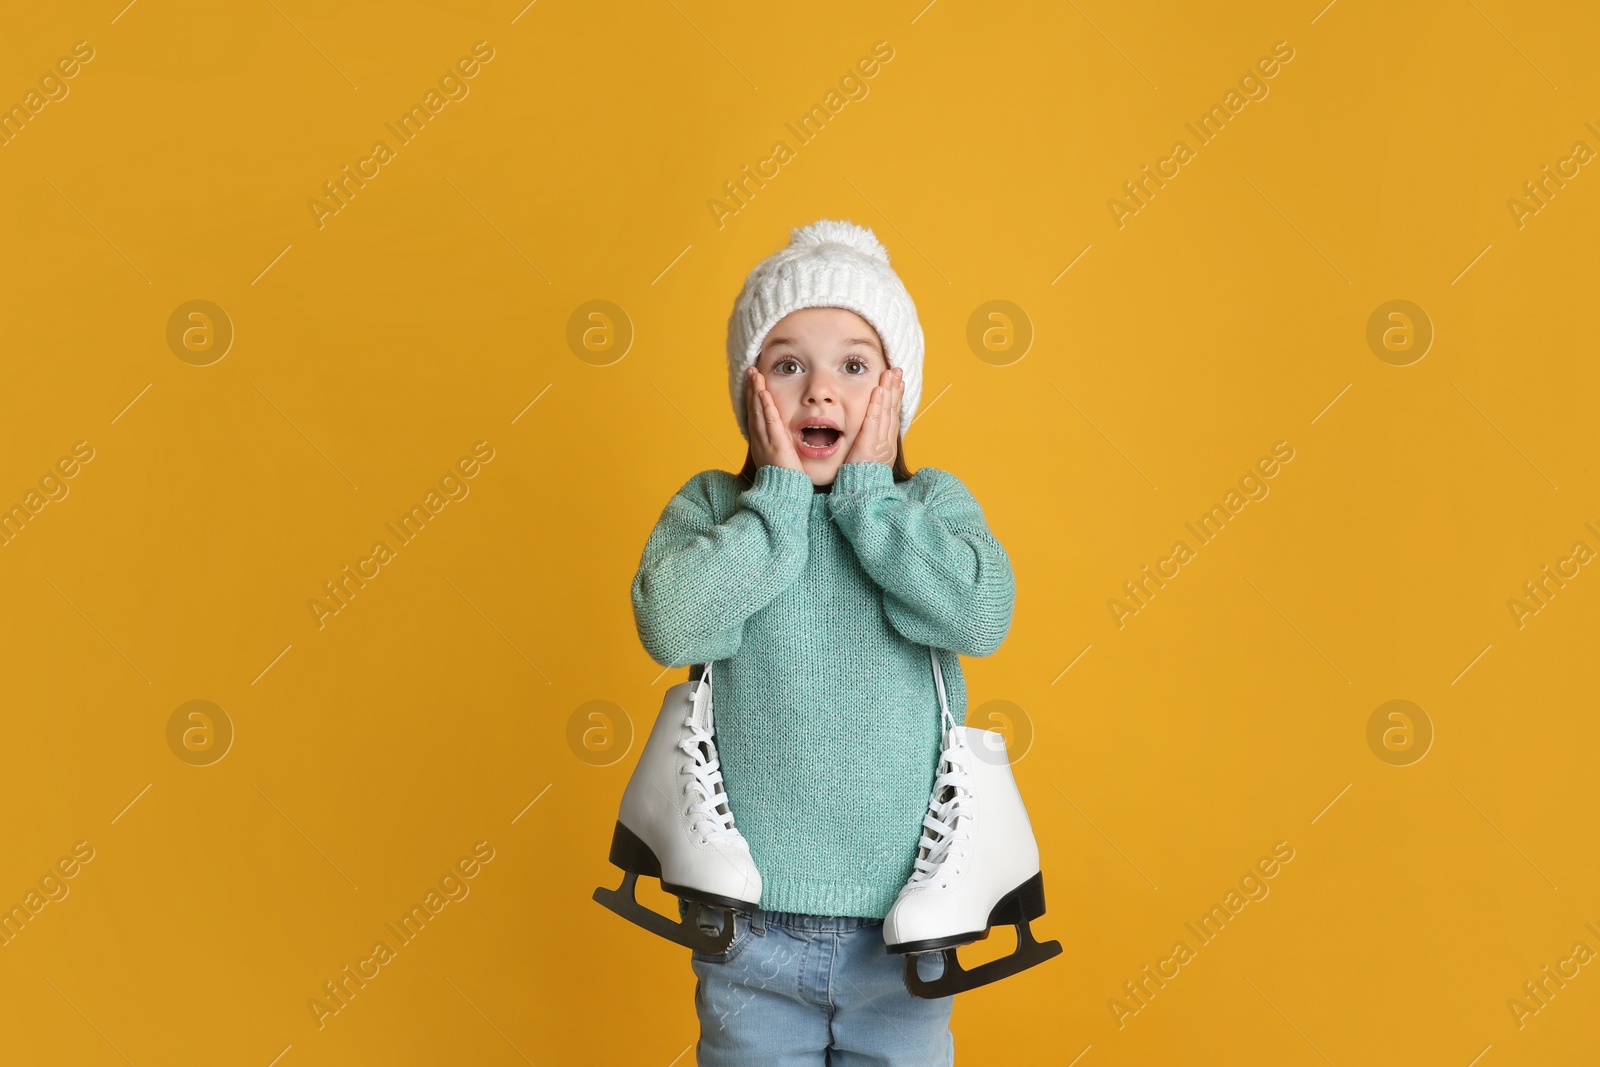 Photo of Excited little girl in turquoise knitted sweater with skates on yellow background